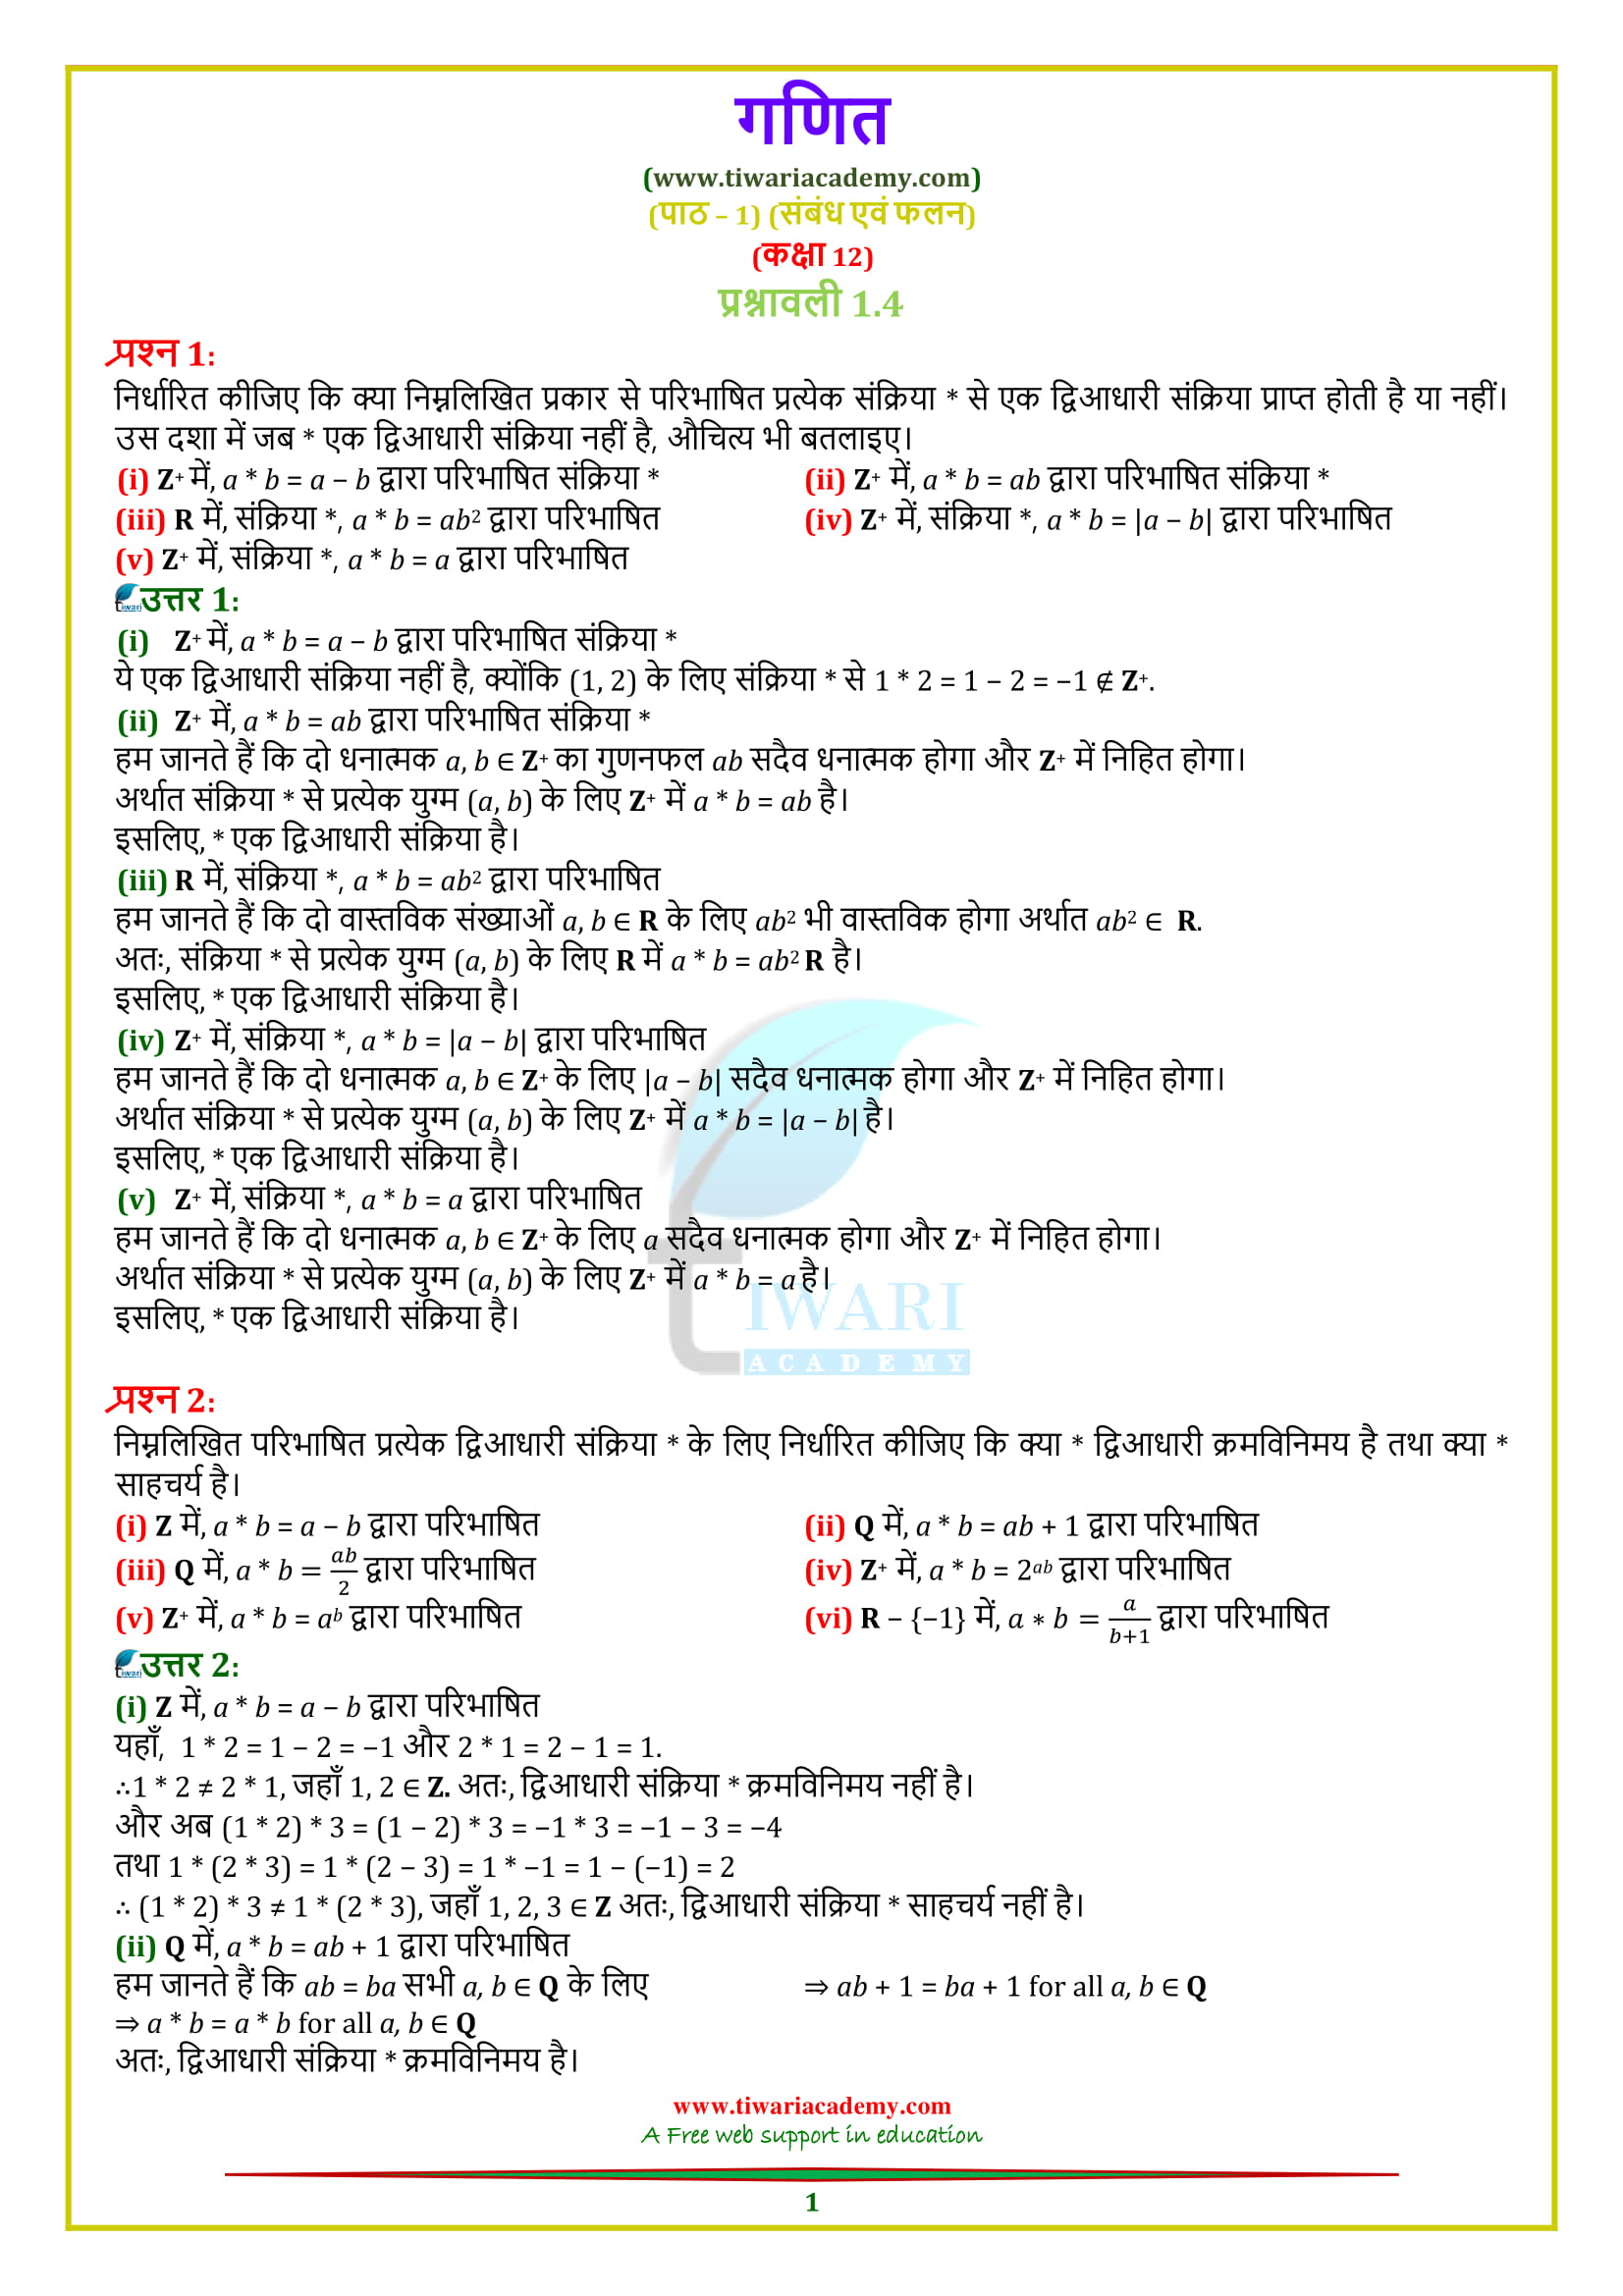 12 Maths Chapter 1 Exercise 1.4 solutions in Hindi medium.